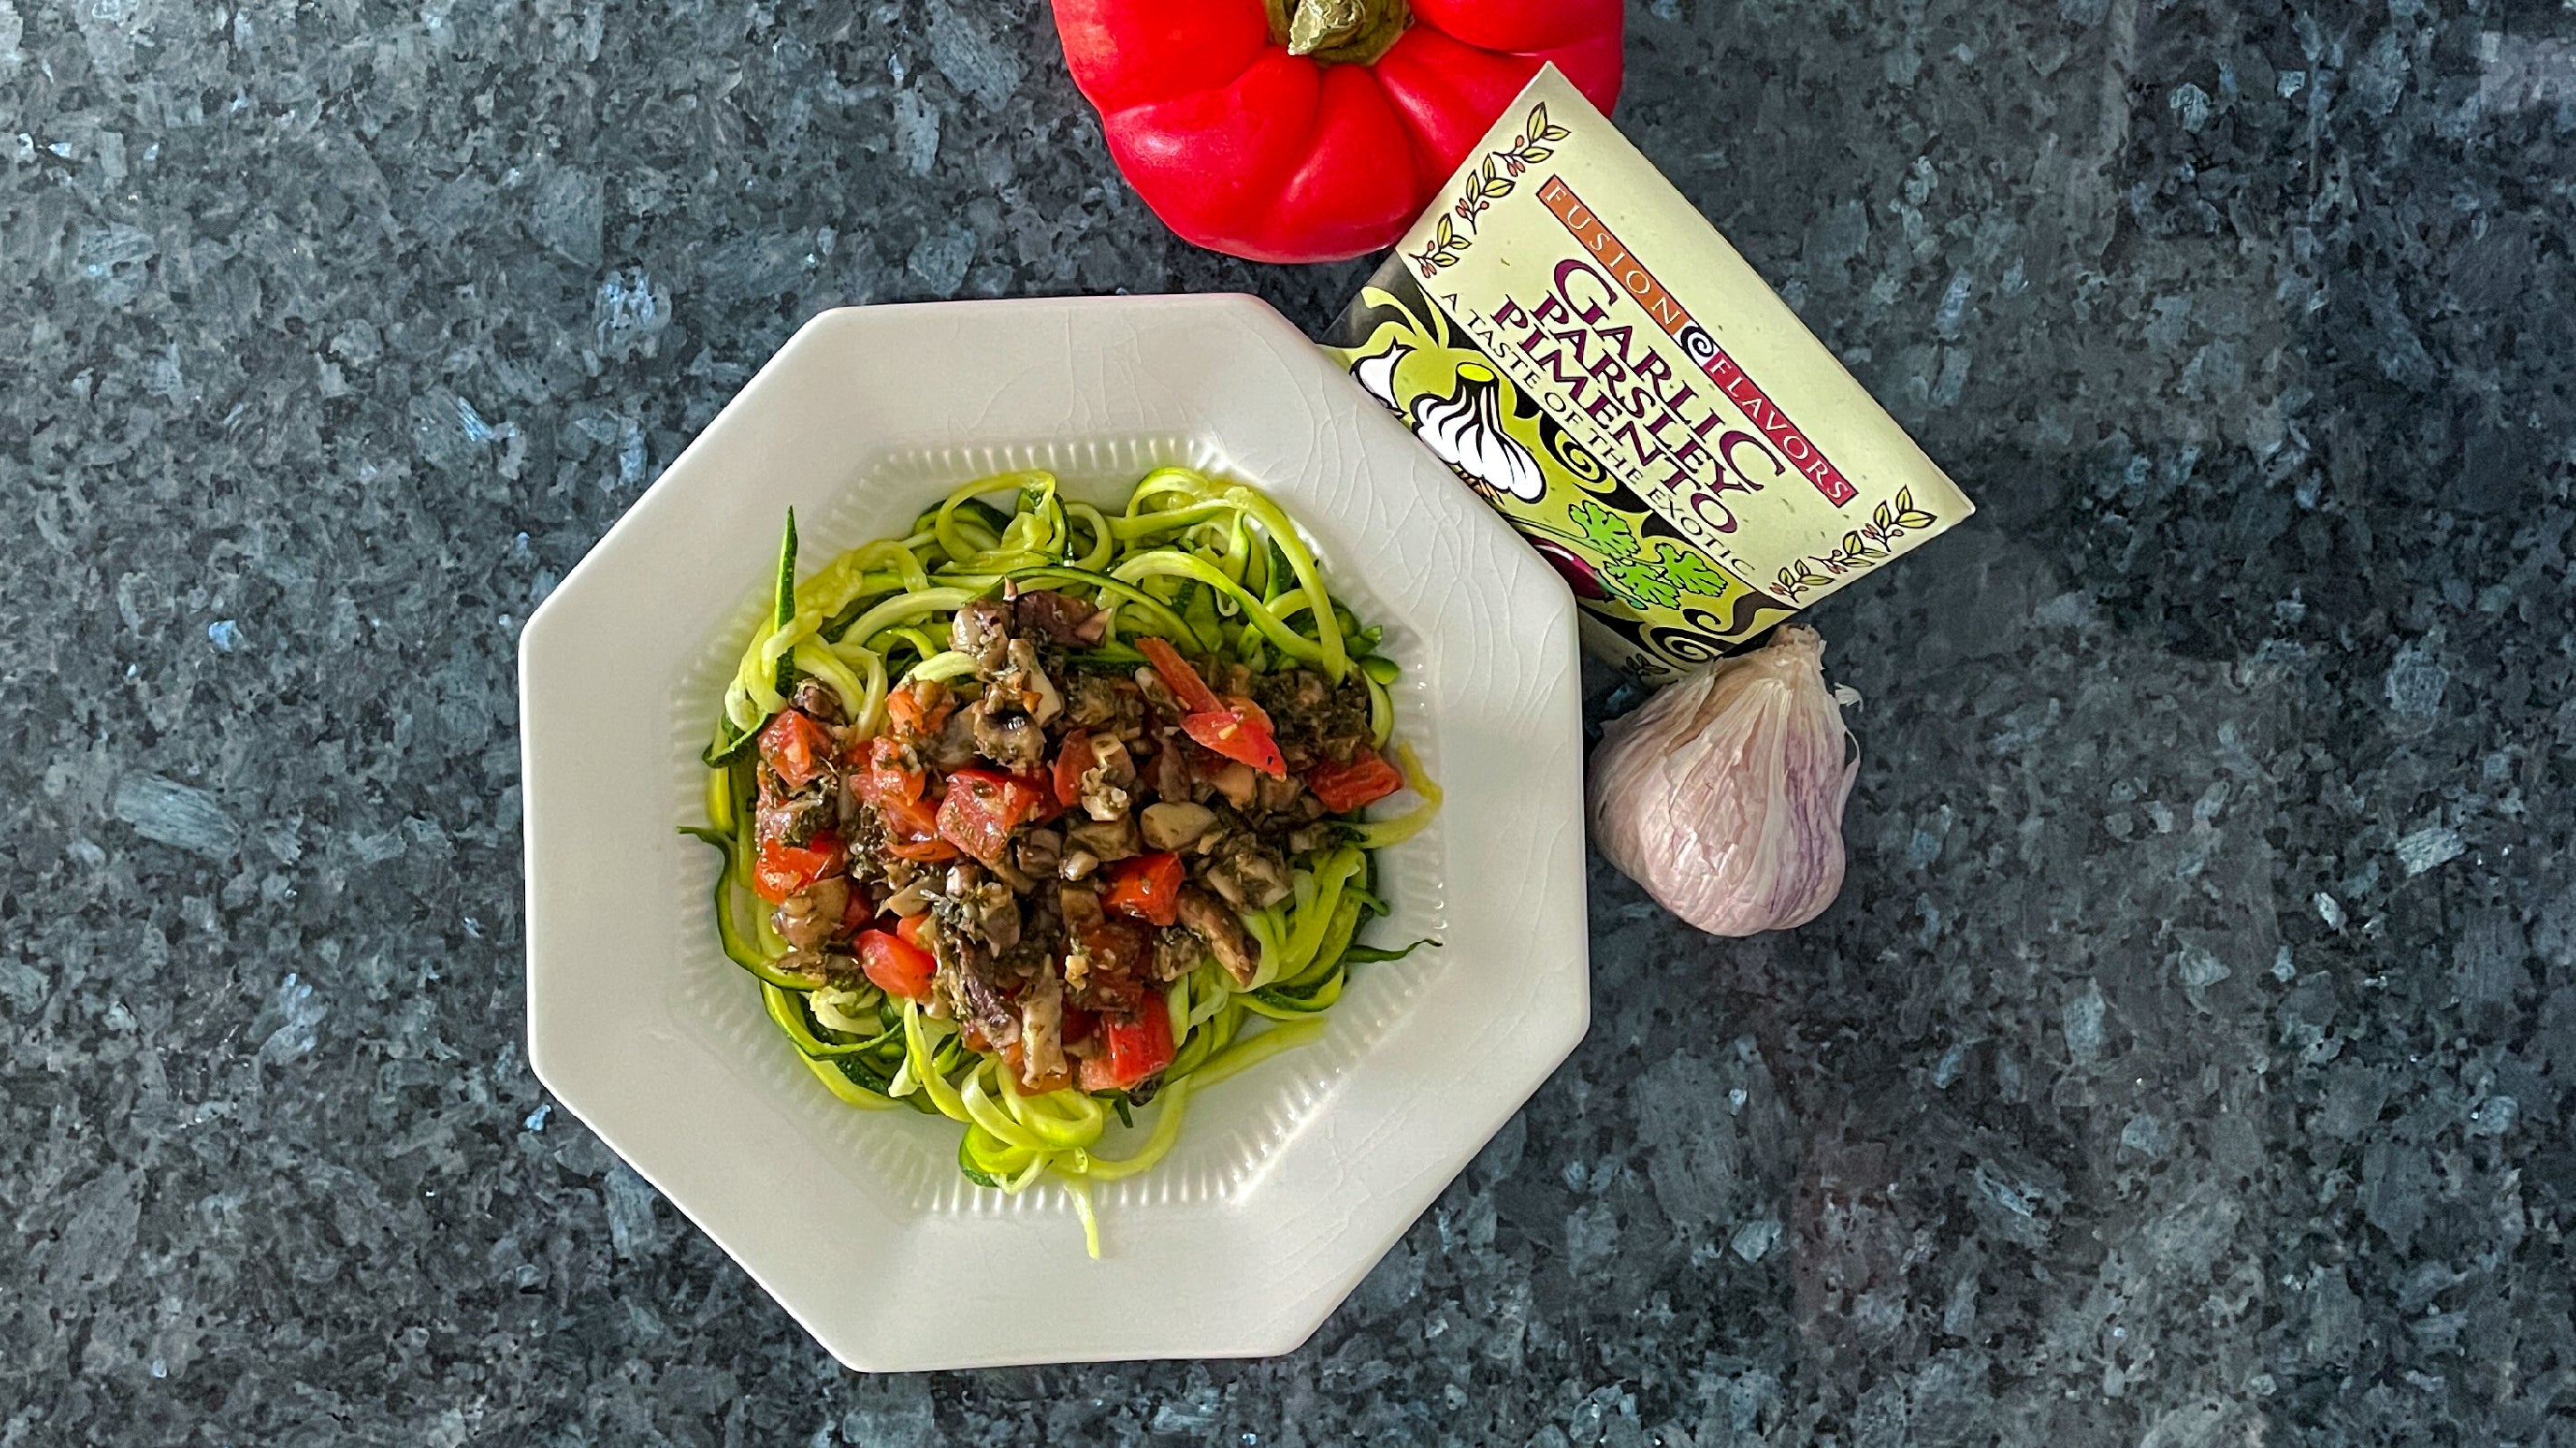 Garlic Parsley Pimento Fettuccini with Zoodles